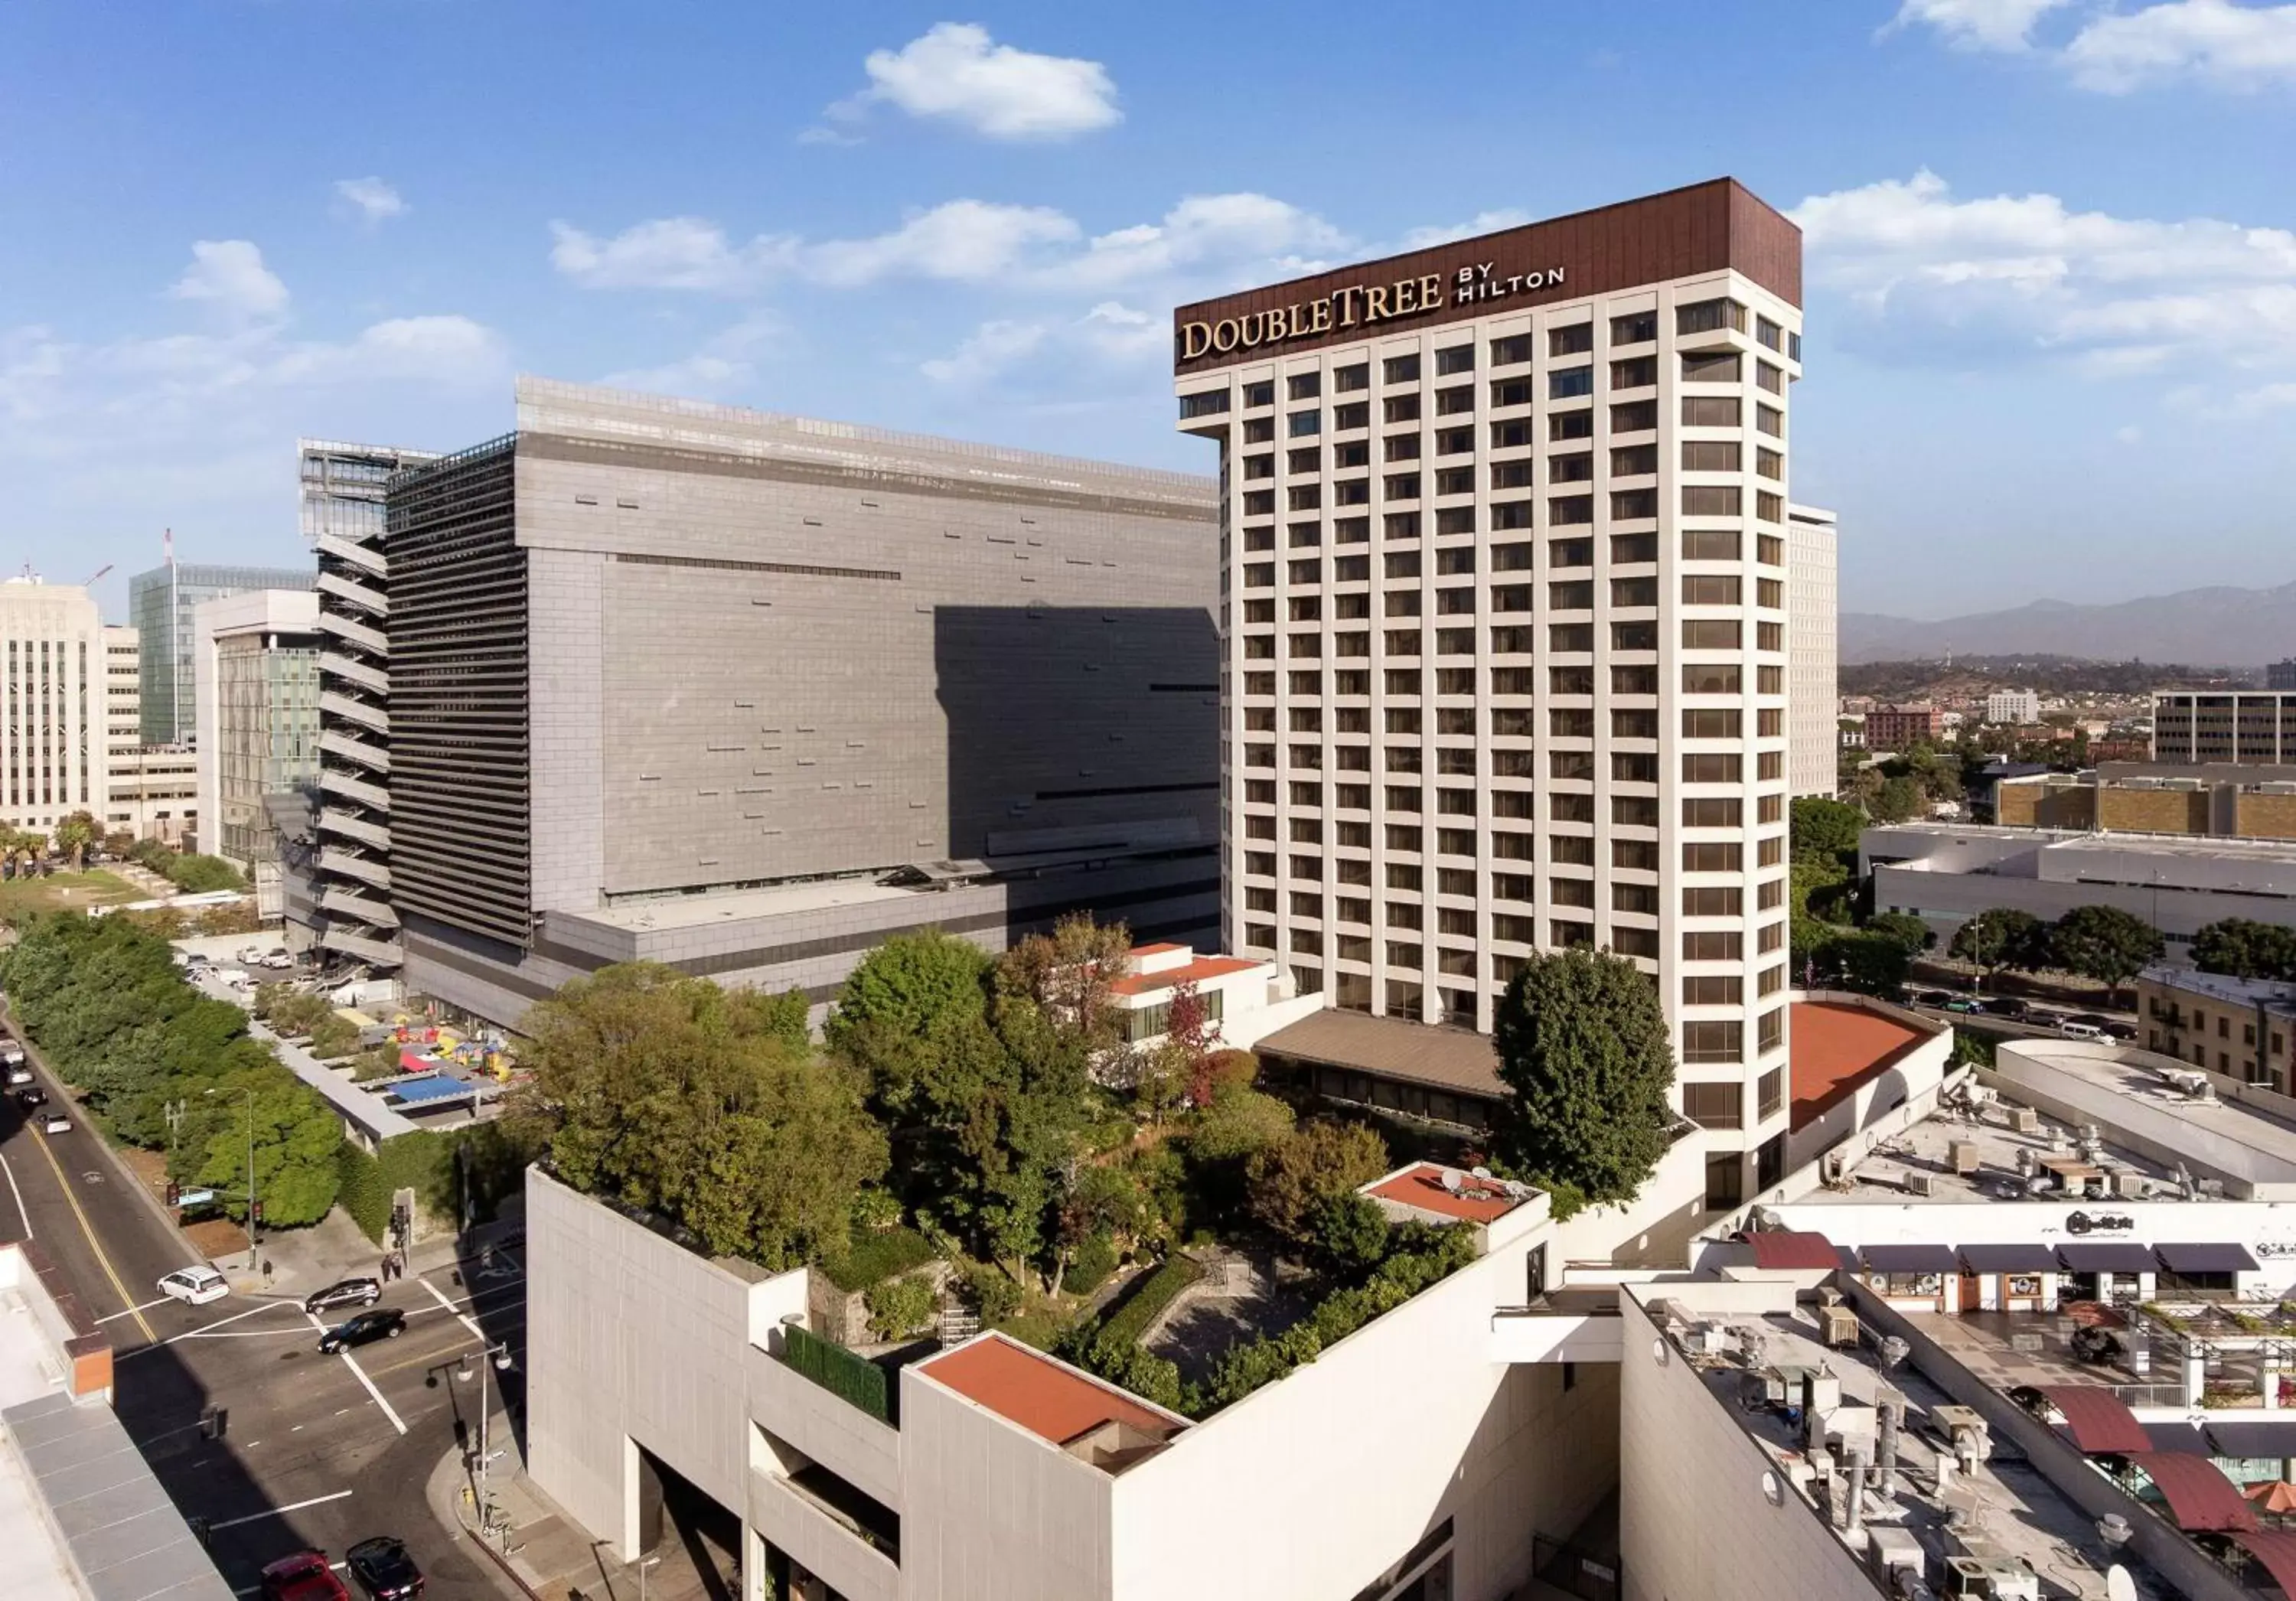 Property building in Doubletree by Hilton Los Angeles Downtown